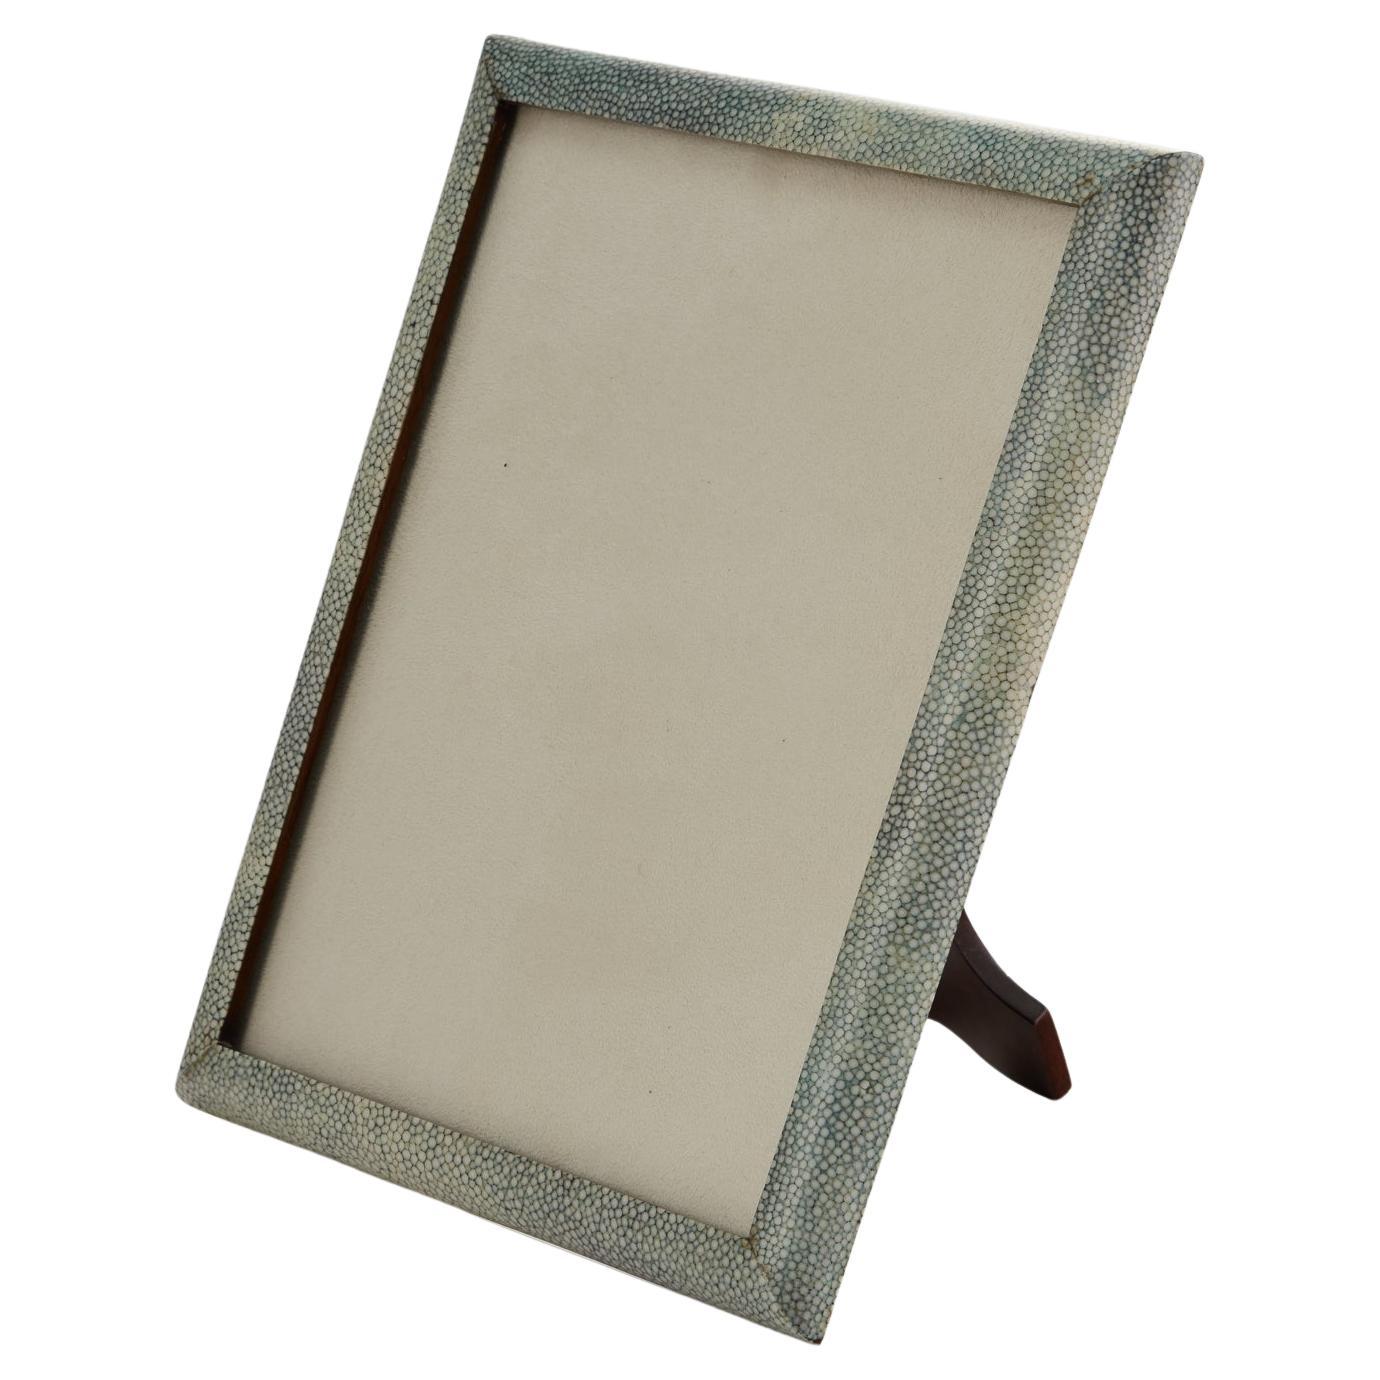 Shagreen Picture Frames